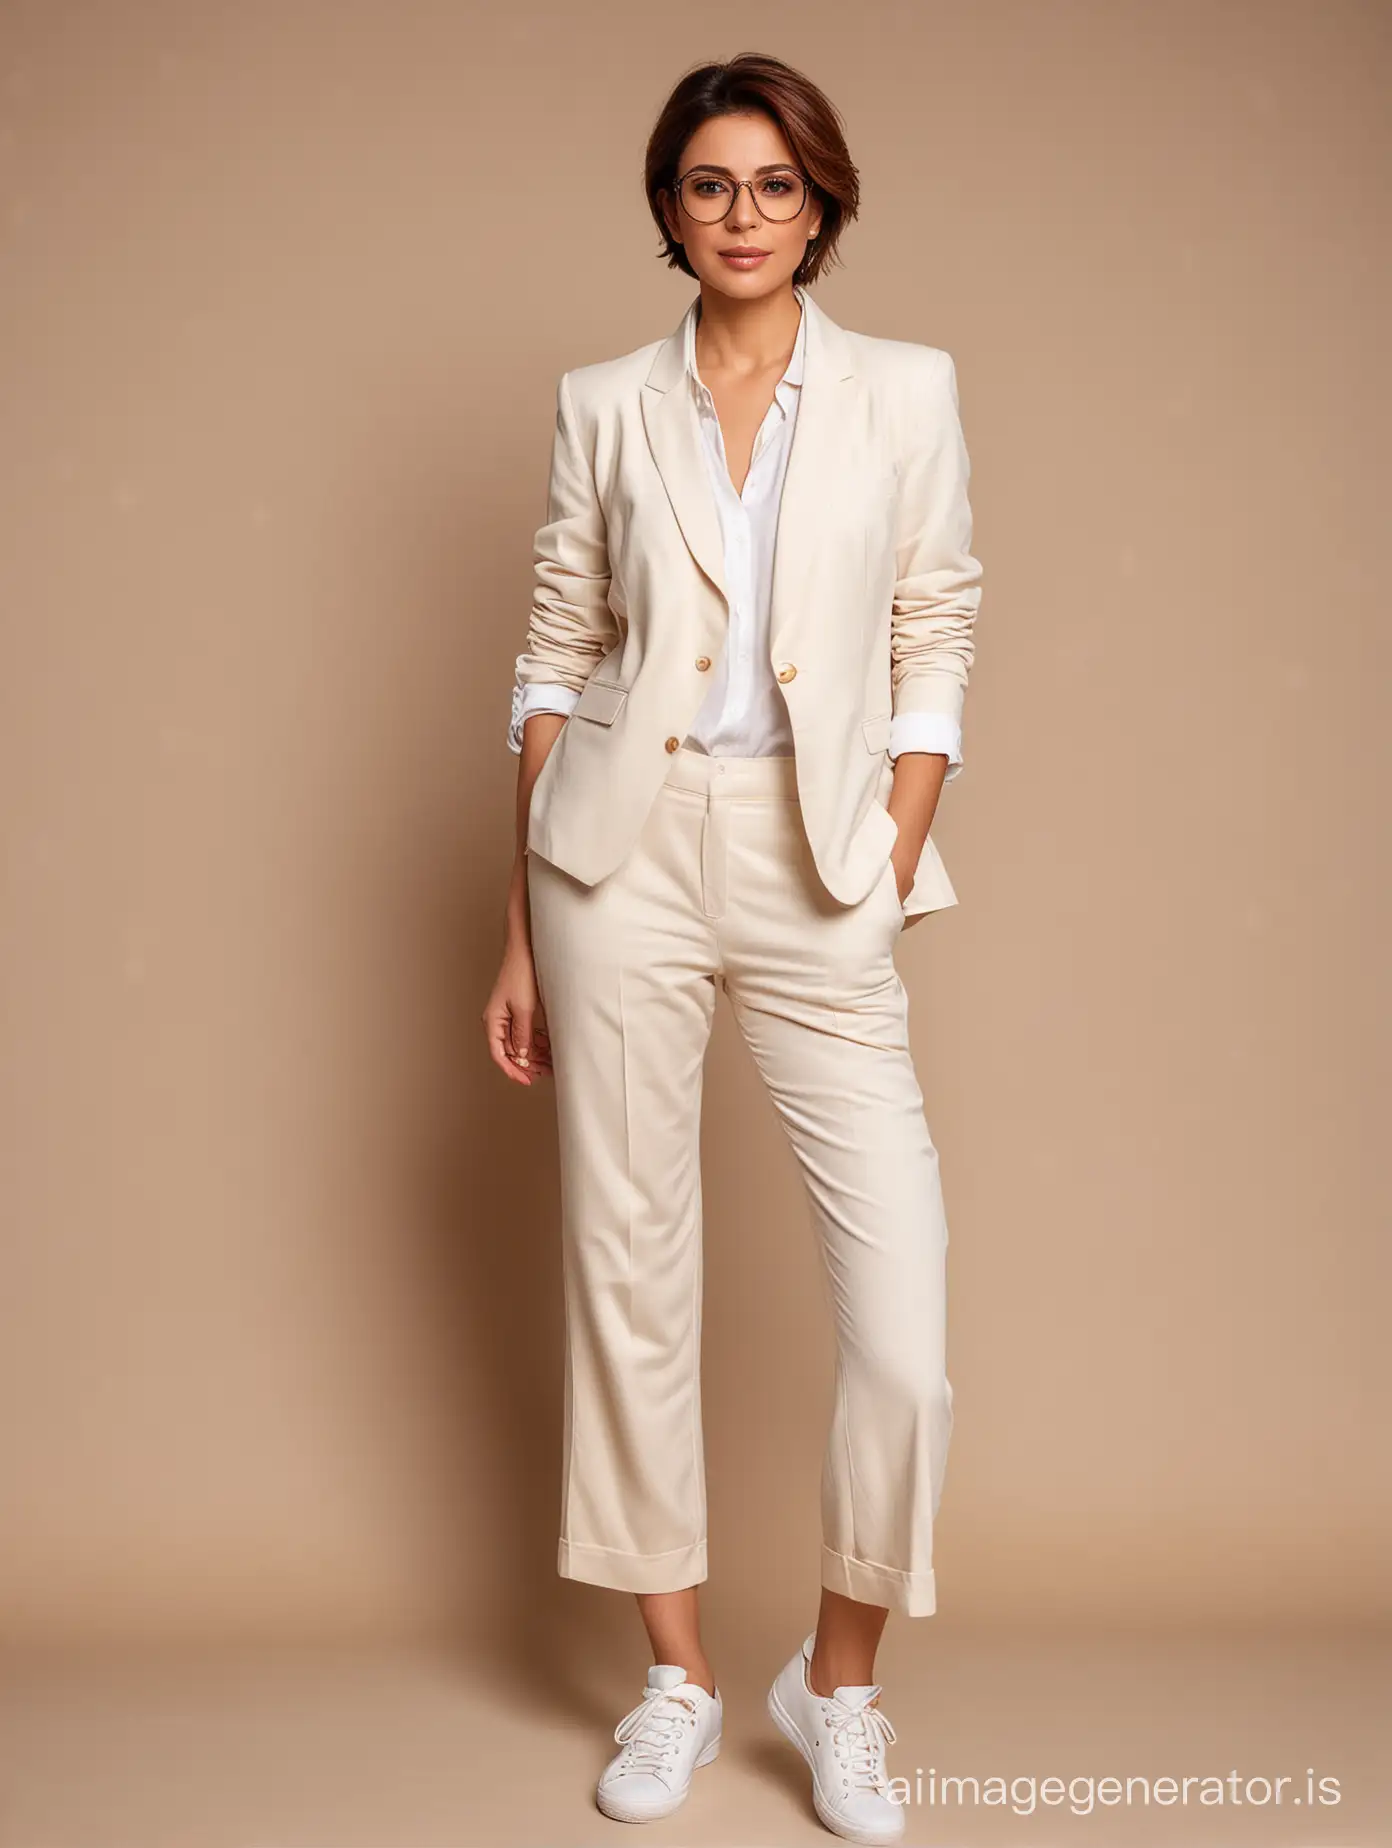 iranian woman 40 years old, white blazer, white shirt in pants, cream wide pants, white sneakers, short brown hair, glasses, full body shot, fantasy  light cream solid background, dramatic lighting